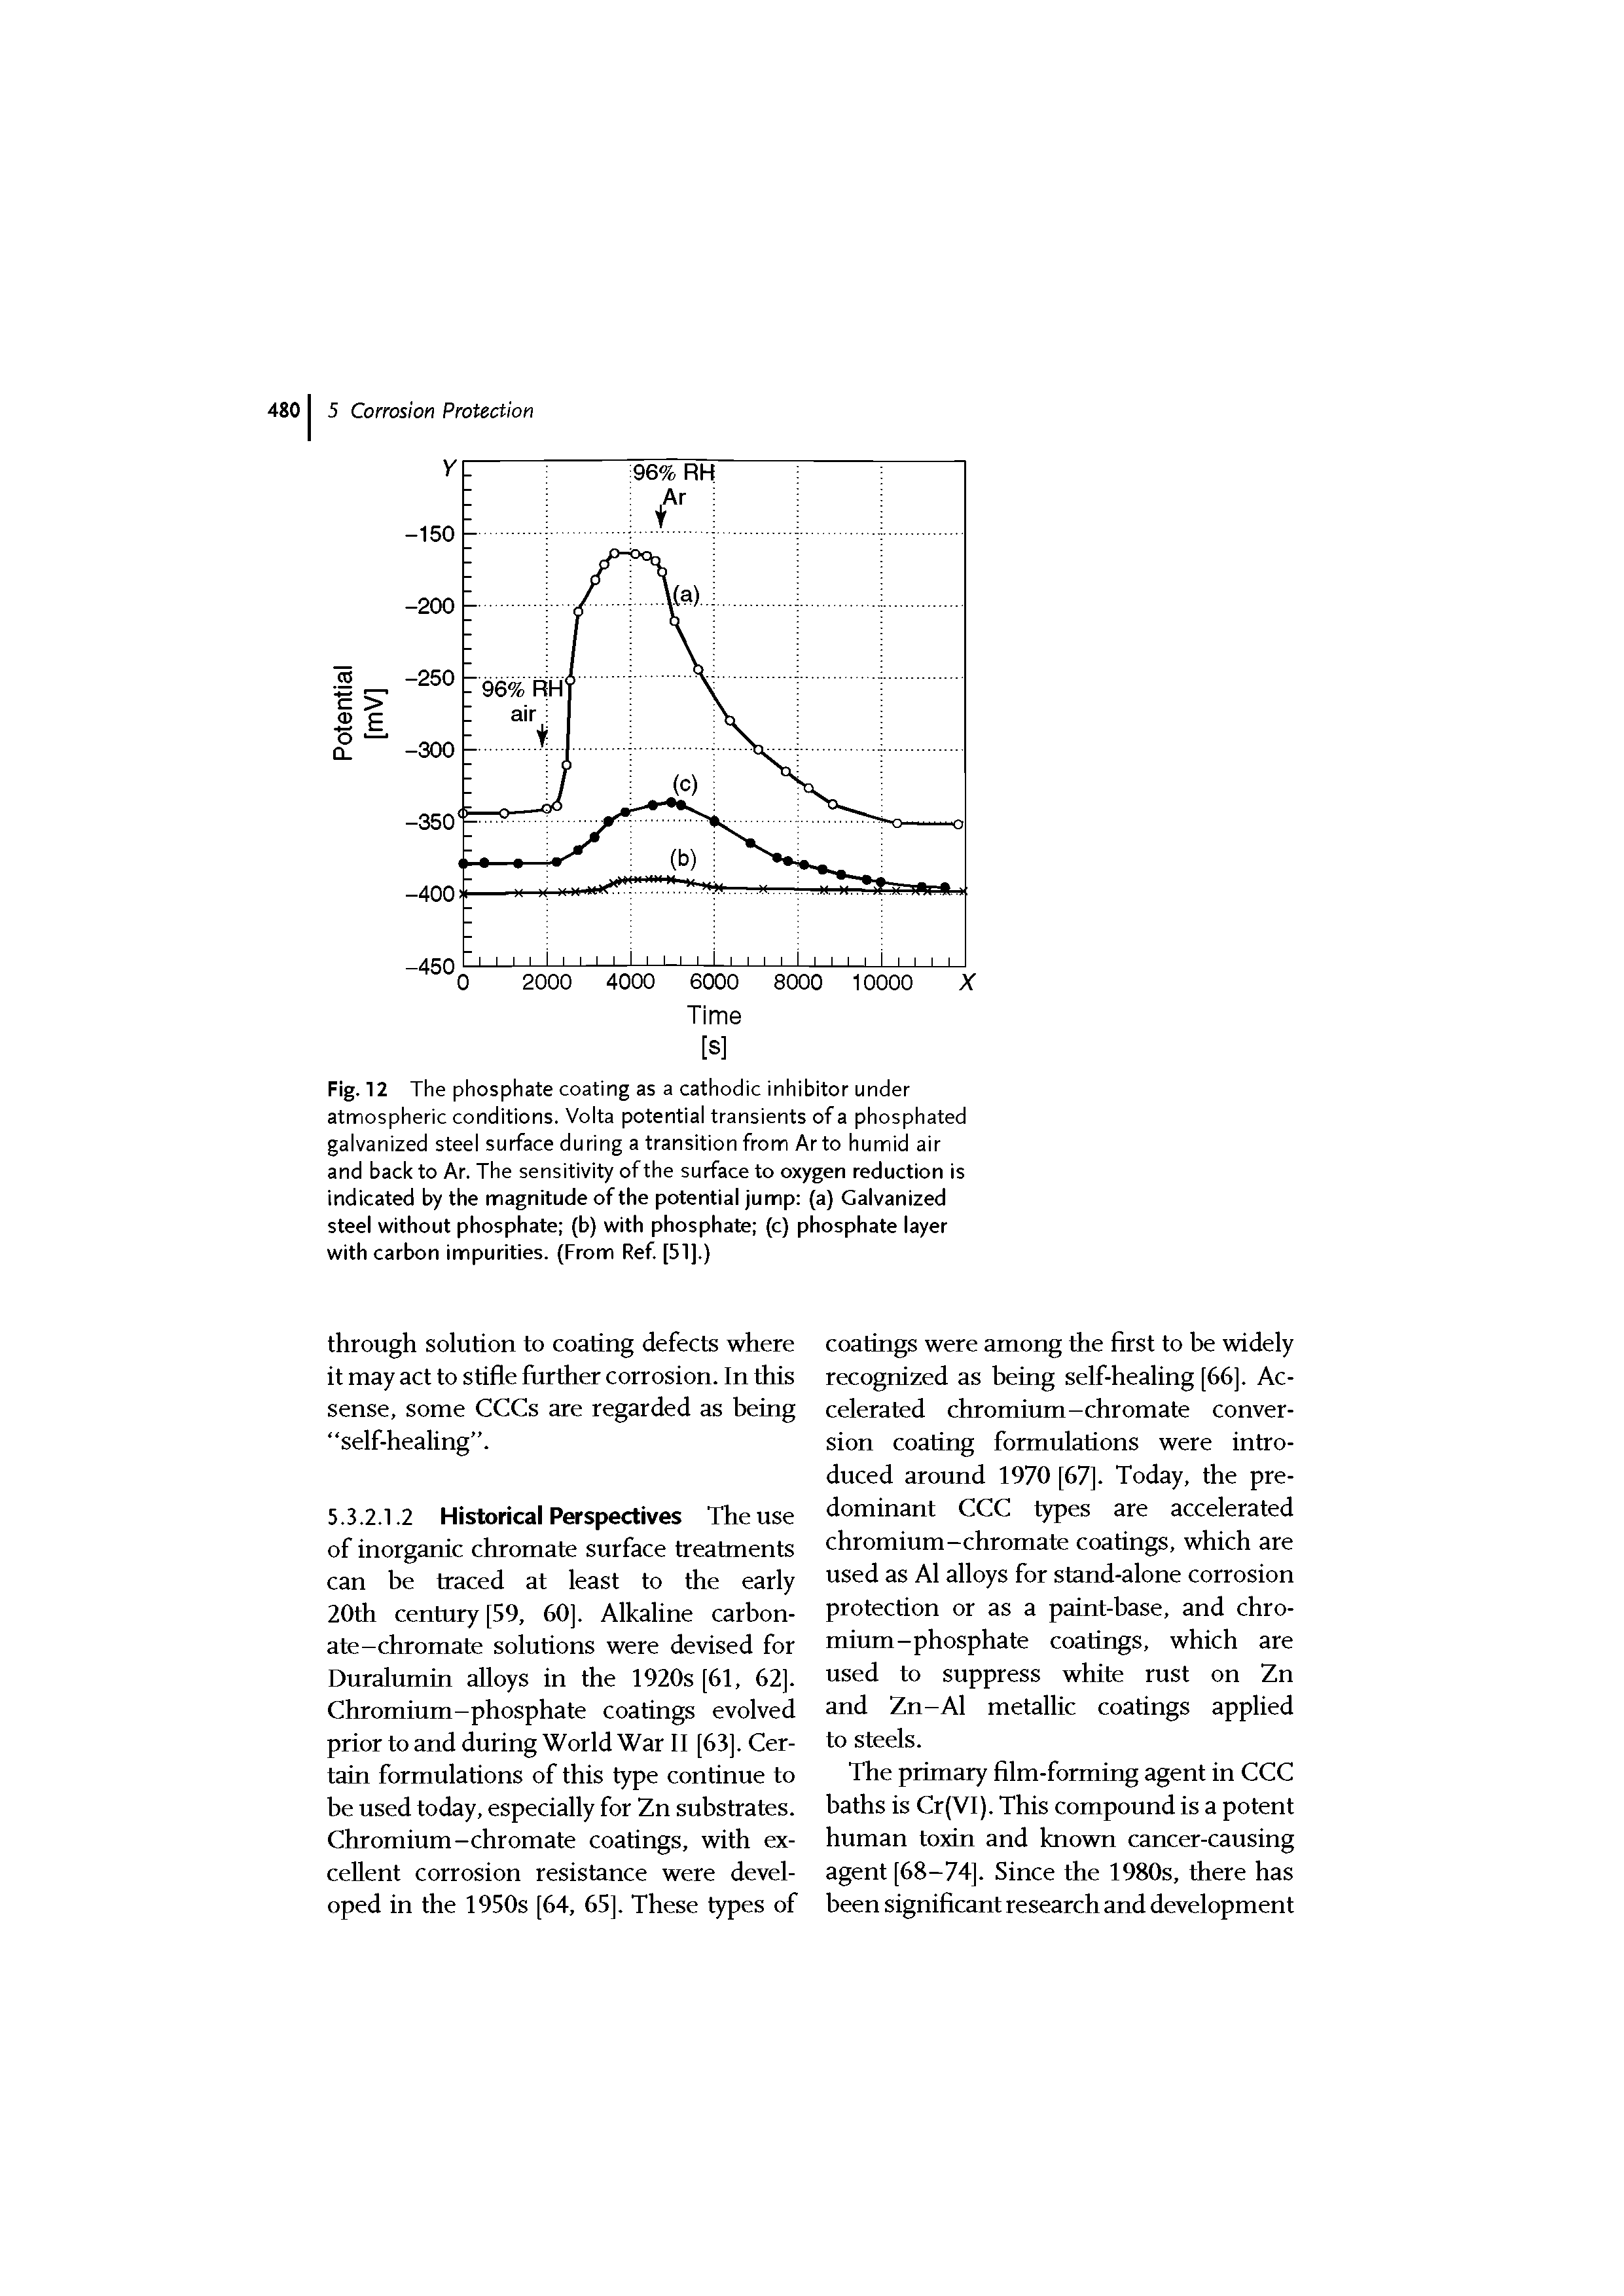 Fig. 12 The phosphate coating as a cathodic inhibitor under atmospheric conditions. Volta potential transients of a phosphated galvanized steel surface during a transition from Arto humid air and back to Ar. The sensitivity of the surface to oxygen reduction is indicated by the magnitude of the potential jump (a) Galvanized steel without phosphate (b) with phosphate (c) phosphate layer with carbon impurities. (From Ref [51].)...